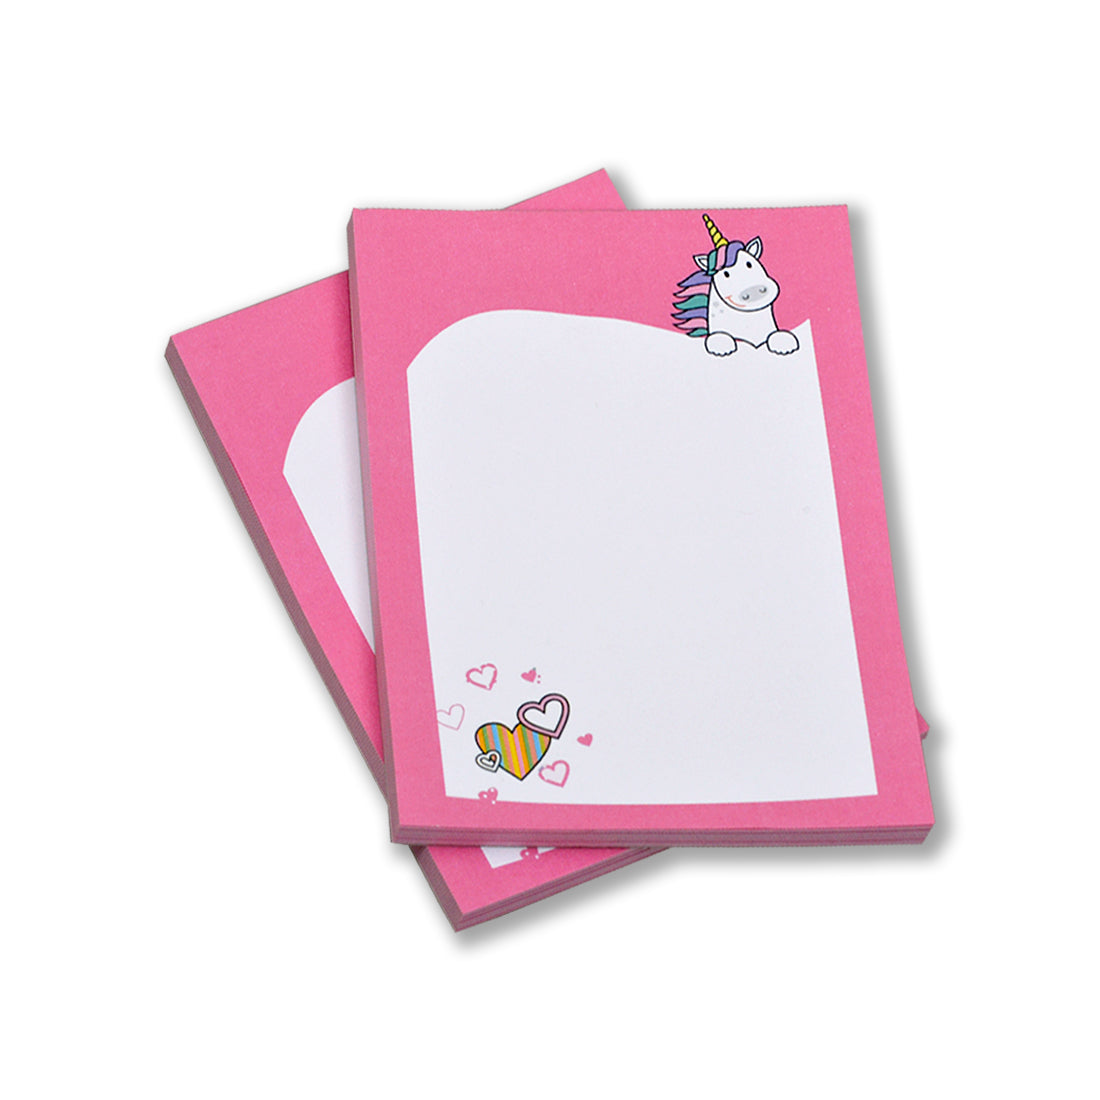 Memo Notepads | Daily Writing Pads Trendy & Stylish Doodling Pads | Easy Tear Off Pads | Pocket Notepads for Kids | Adults | Family Set of 4